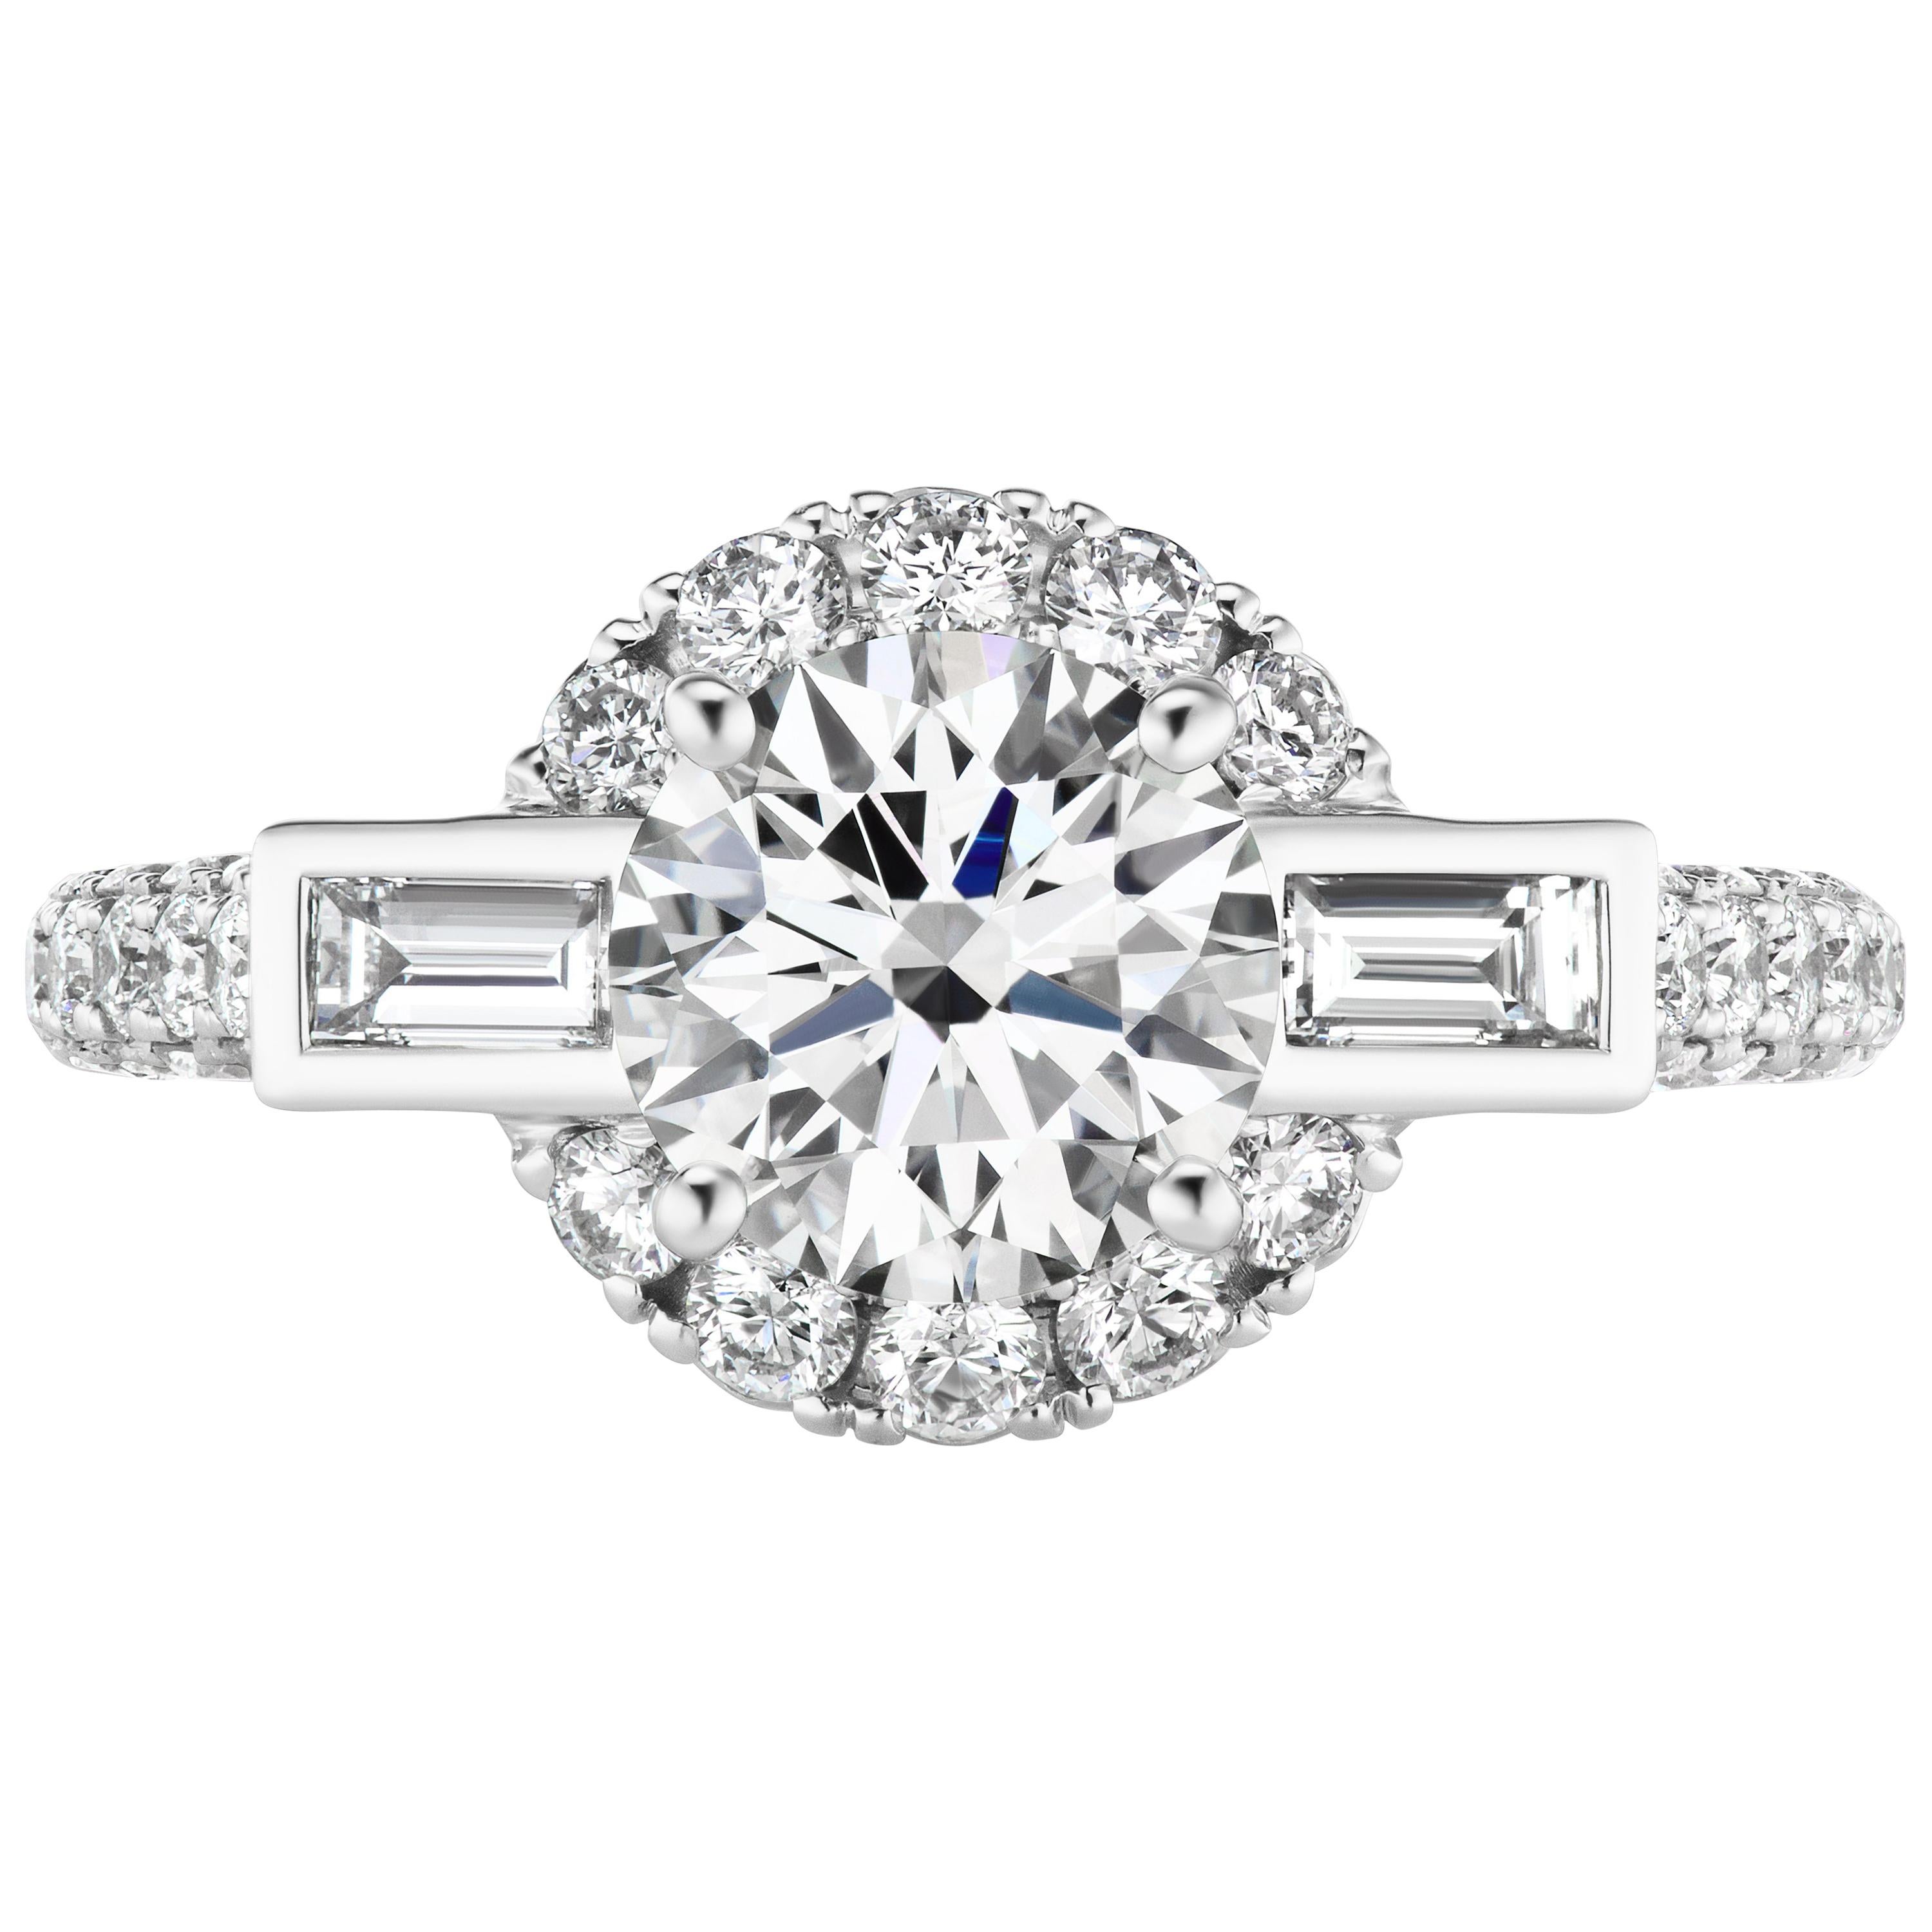 1.50 Carat Round Diamond Engagement Ring with 1.07 Carat Baguette Accents